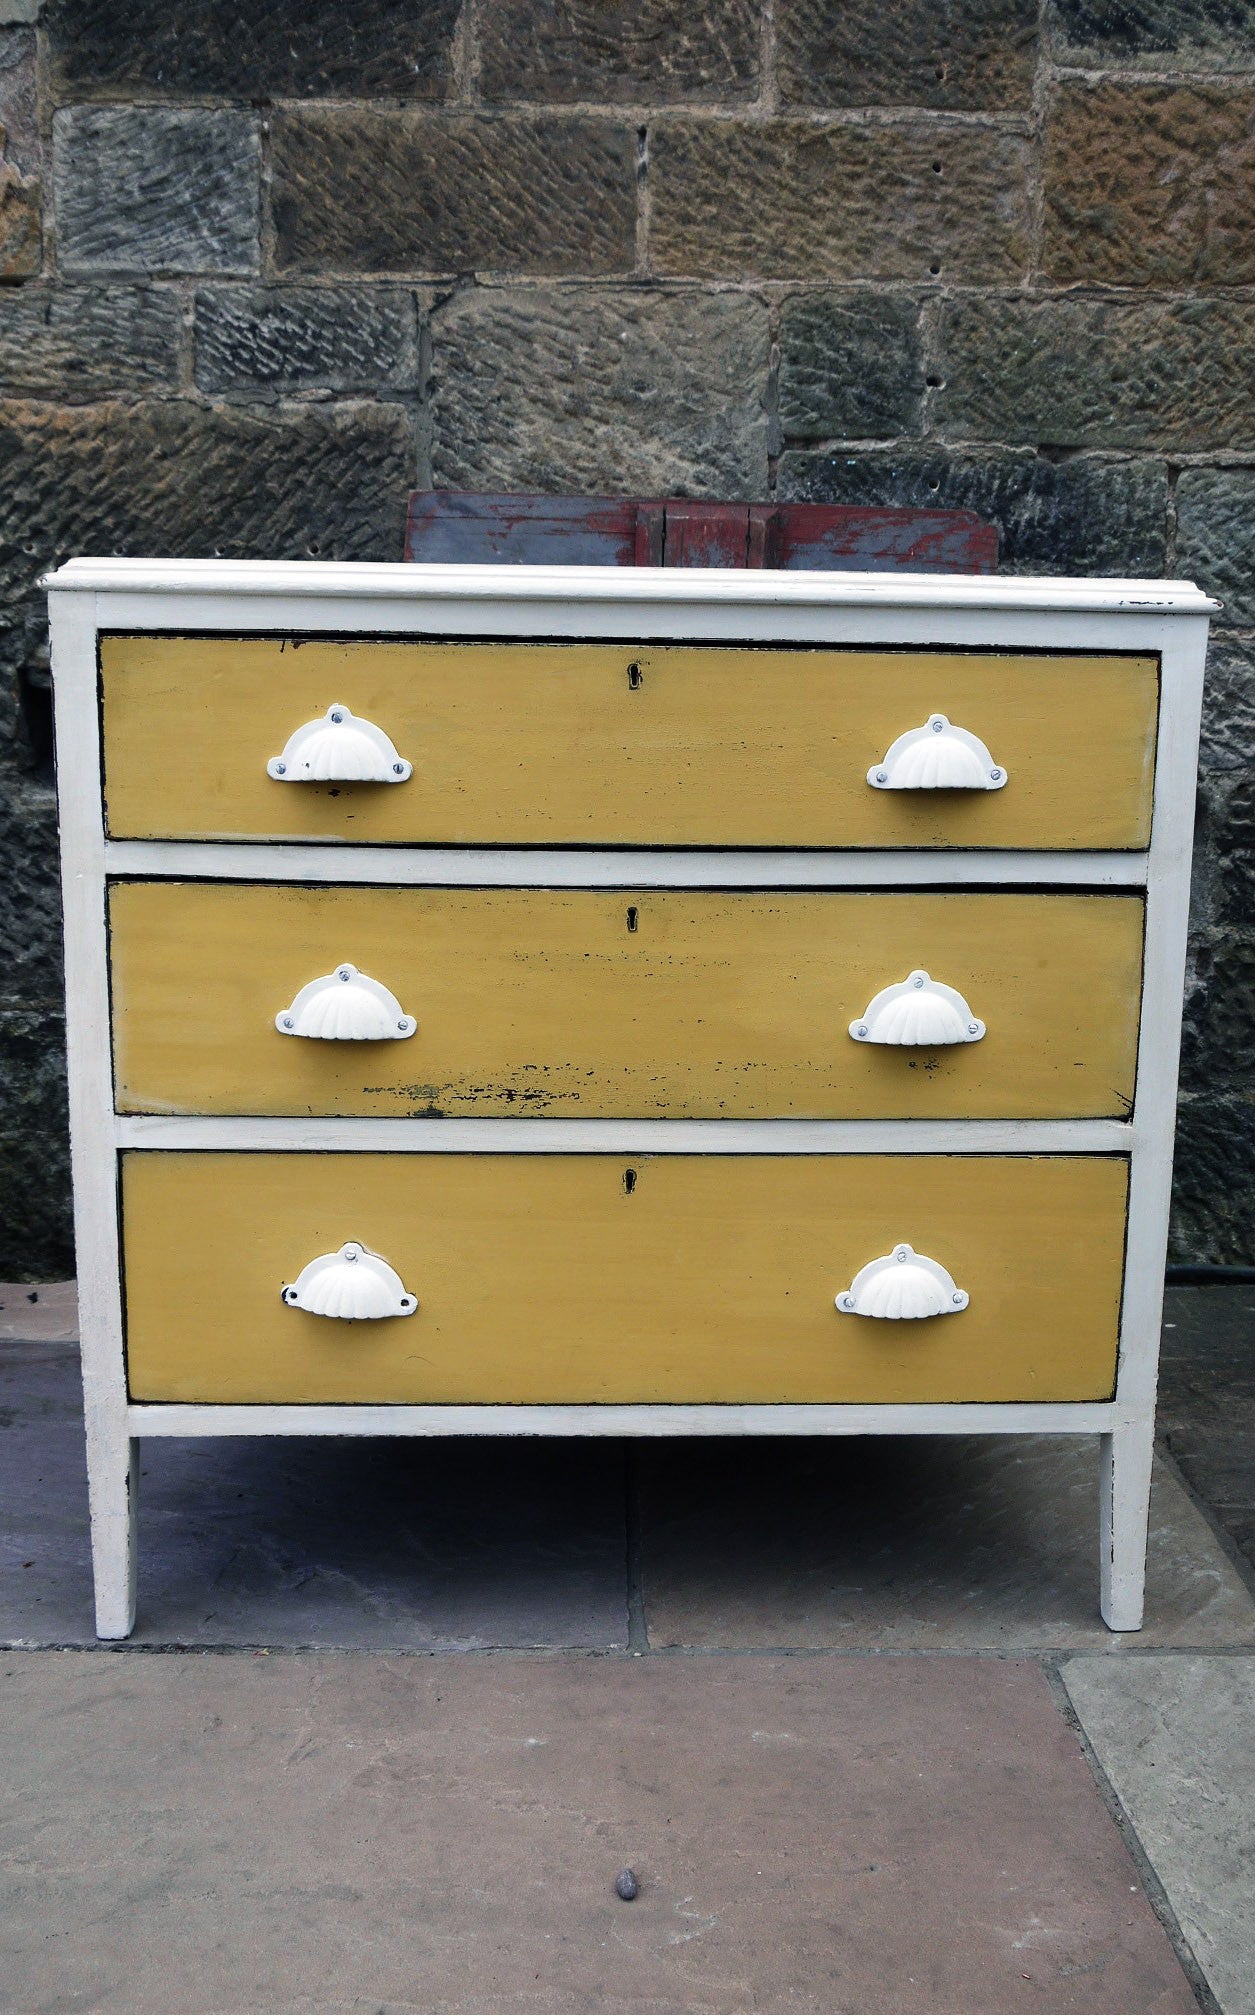 Refurbished vintage chest of drawers in Miss Mustard Seed Milk Paint with white handles